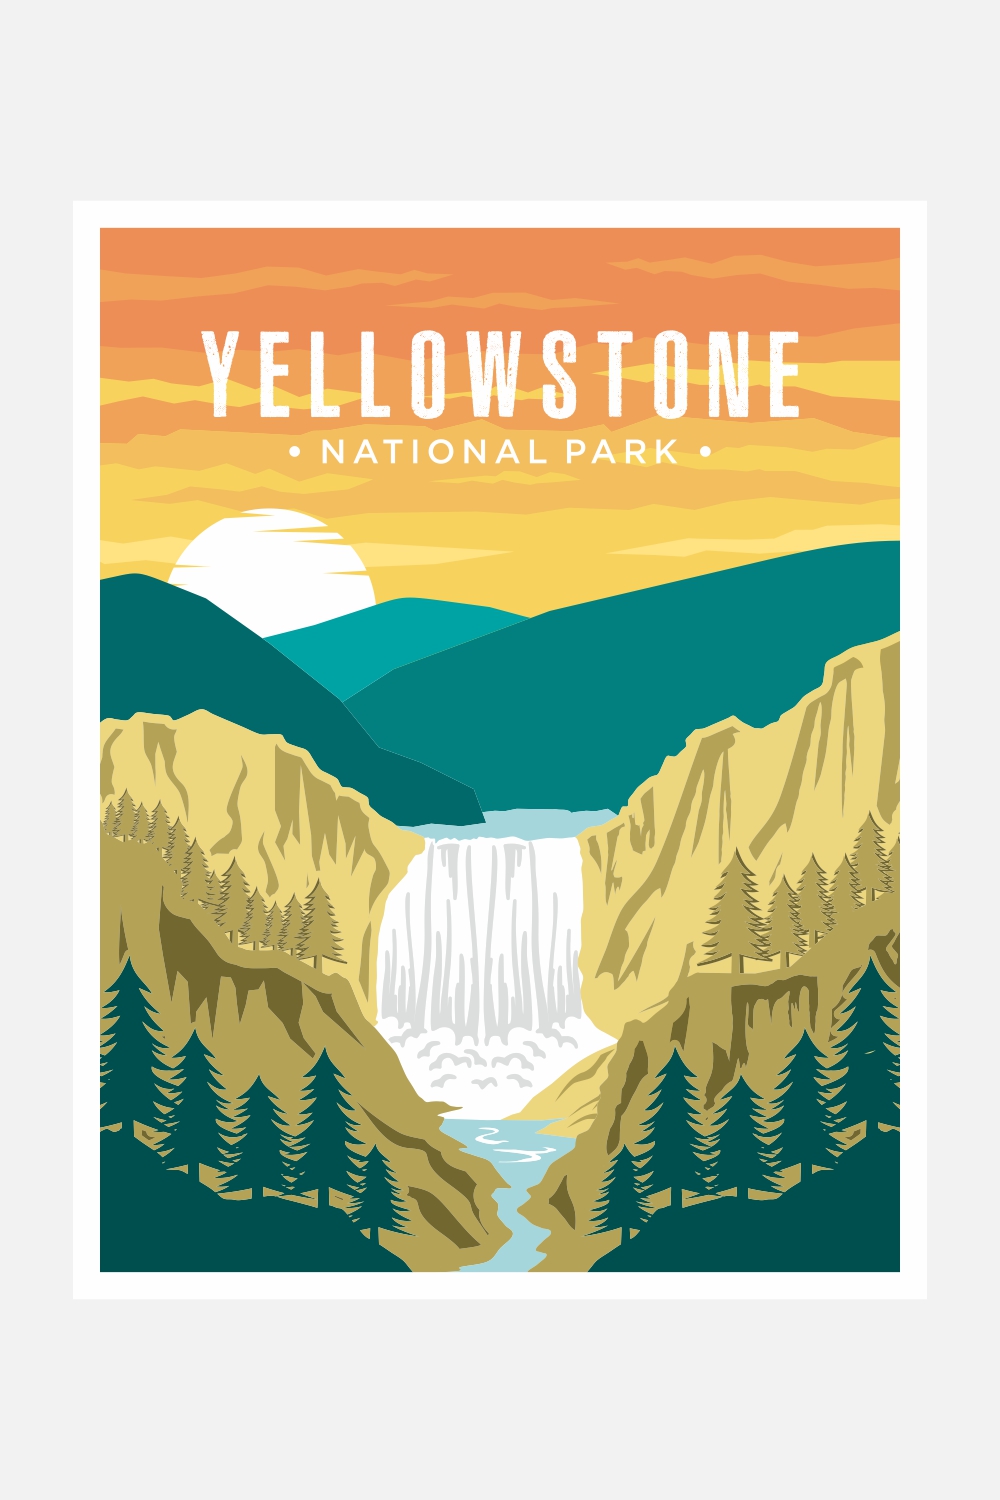 Yellowstone Falls National Park poster vector illustration design – Only $8 pinterest preview image.